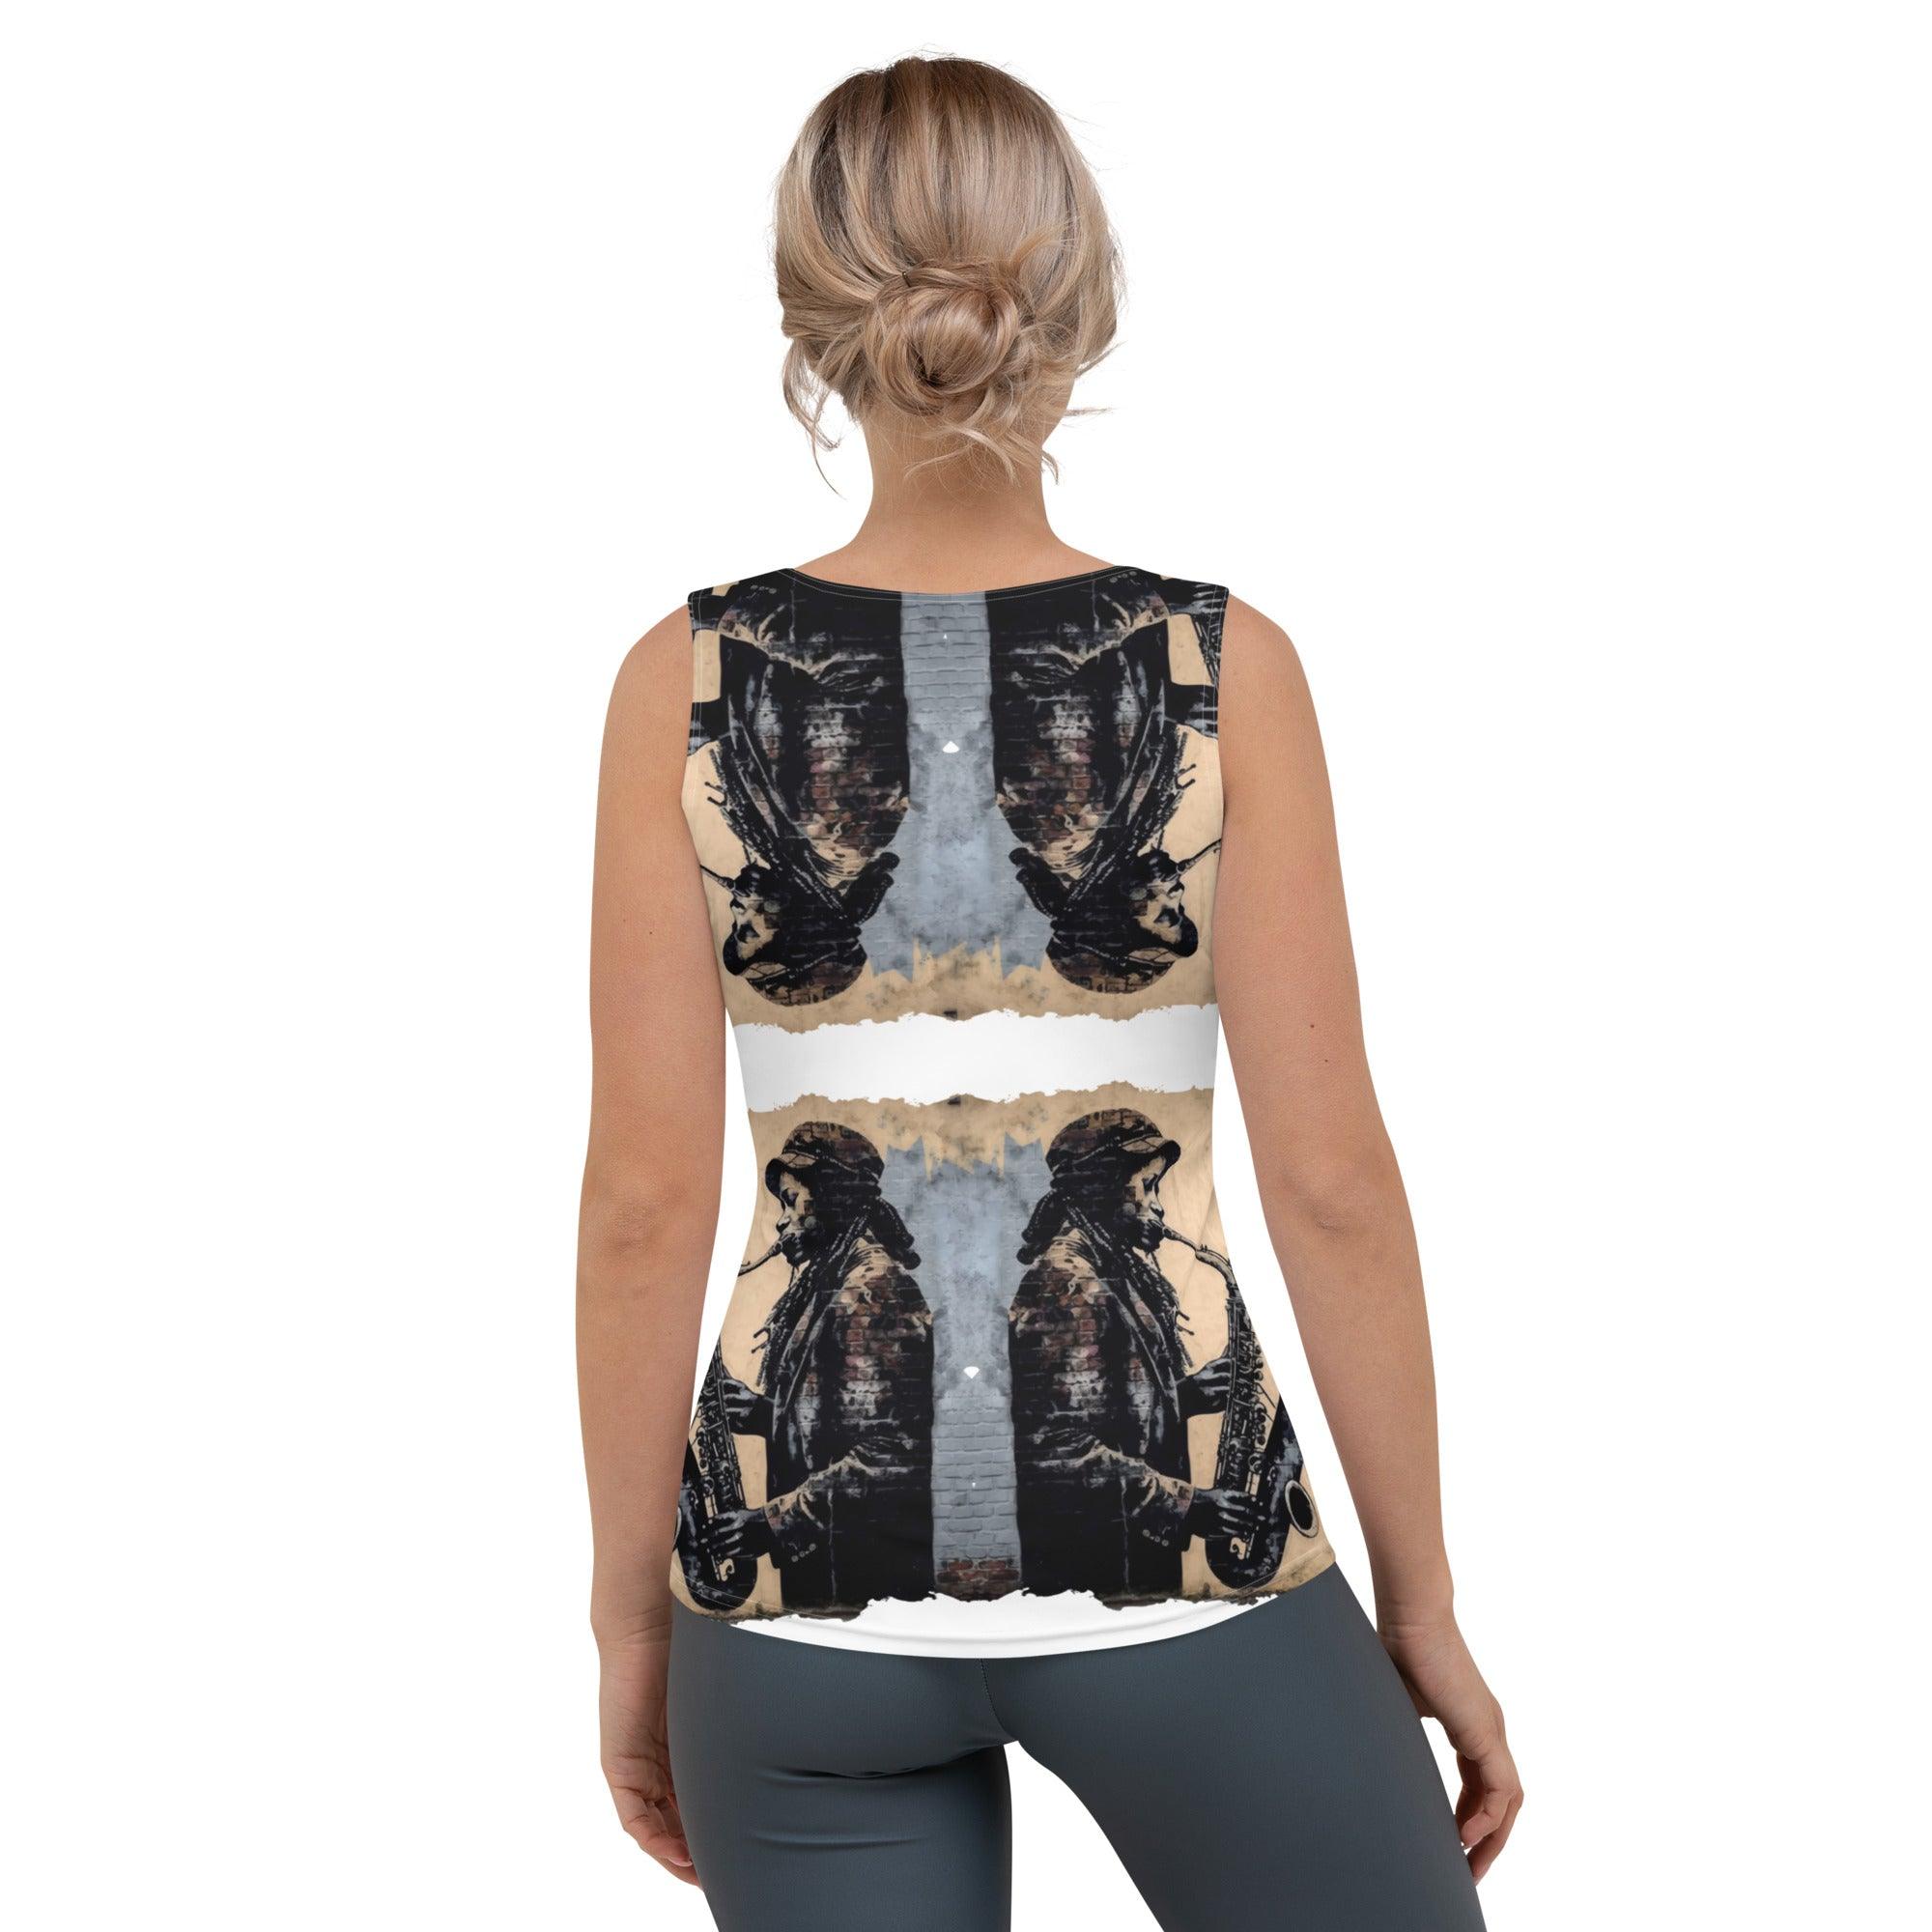 Saxophone Swagger Sublimation Cut & Sew Tank Top - Beyond T-shirts